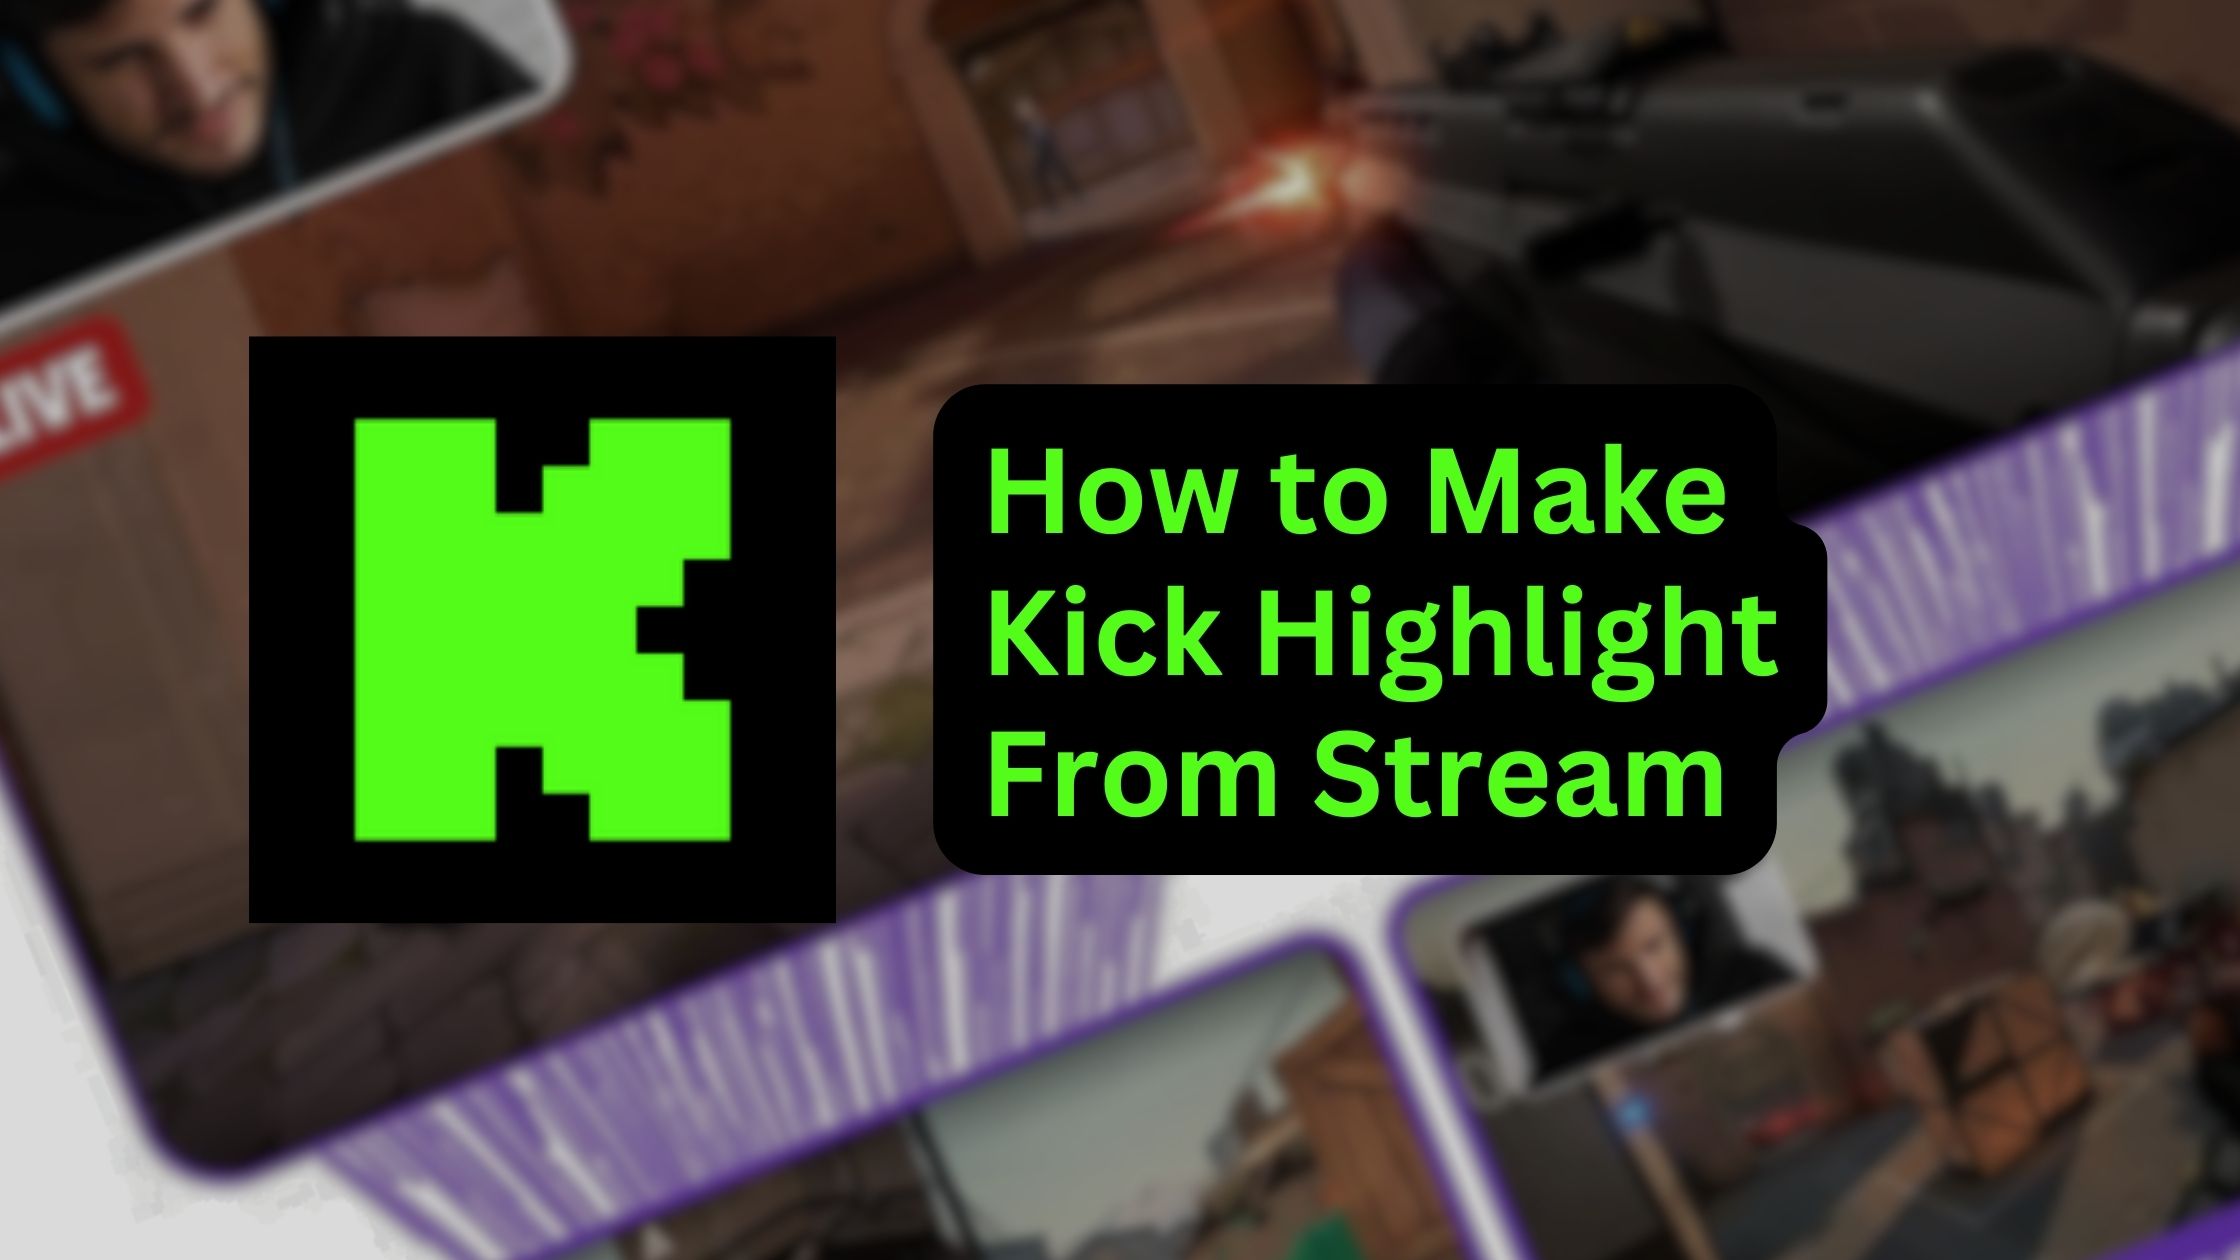 how to make kick highlight from stream featured image